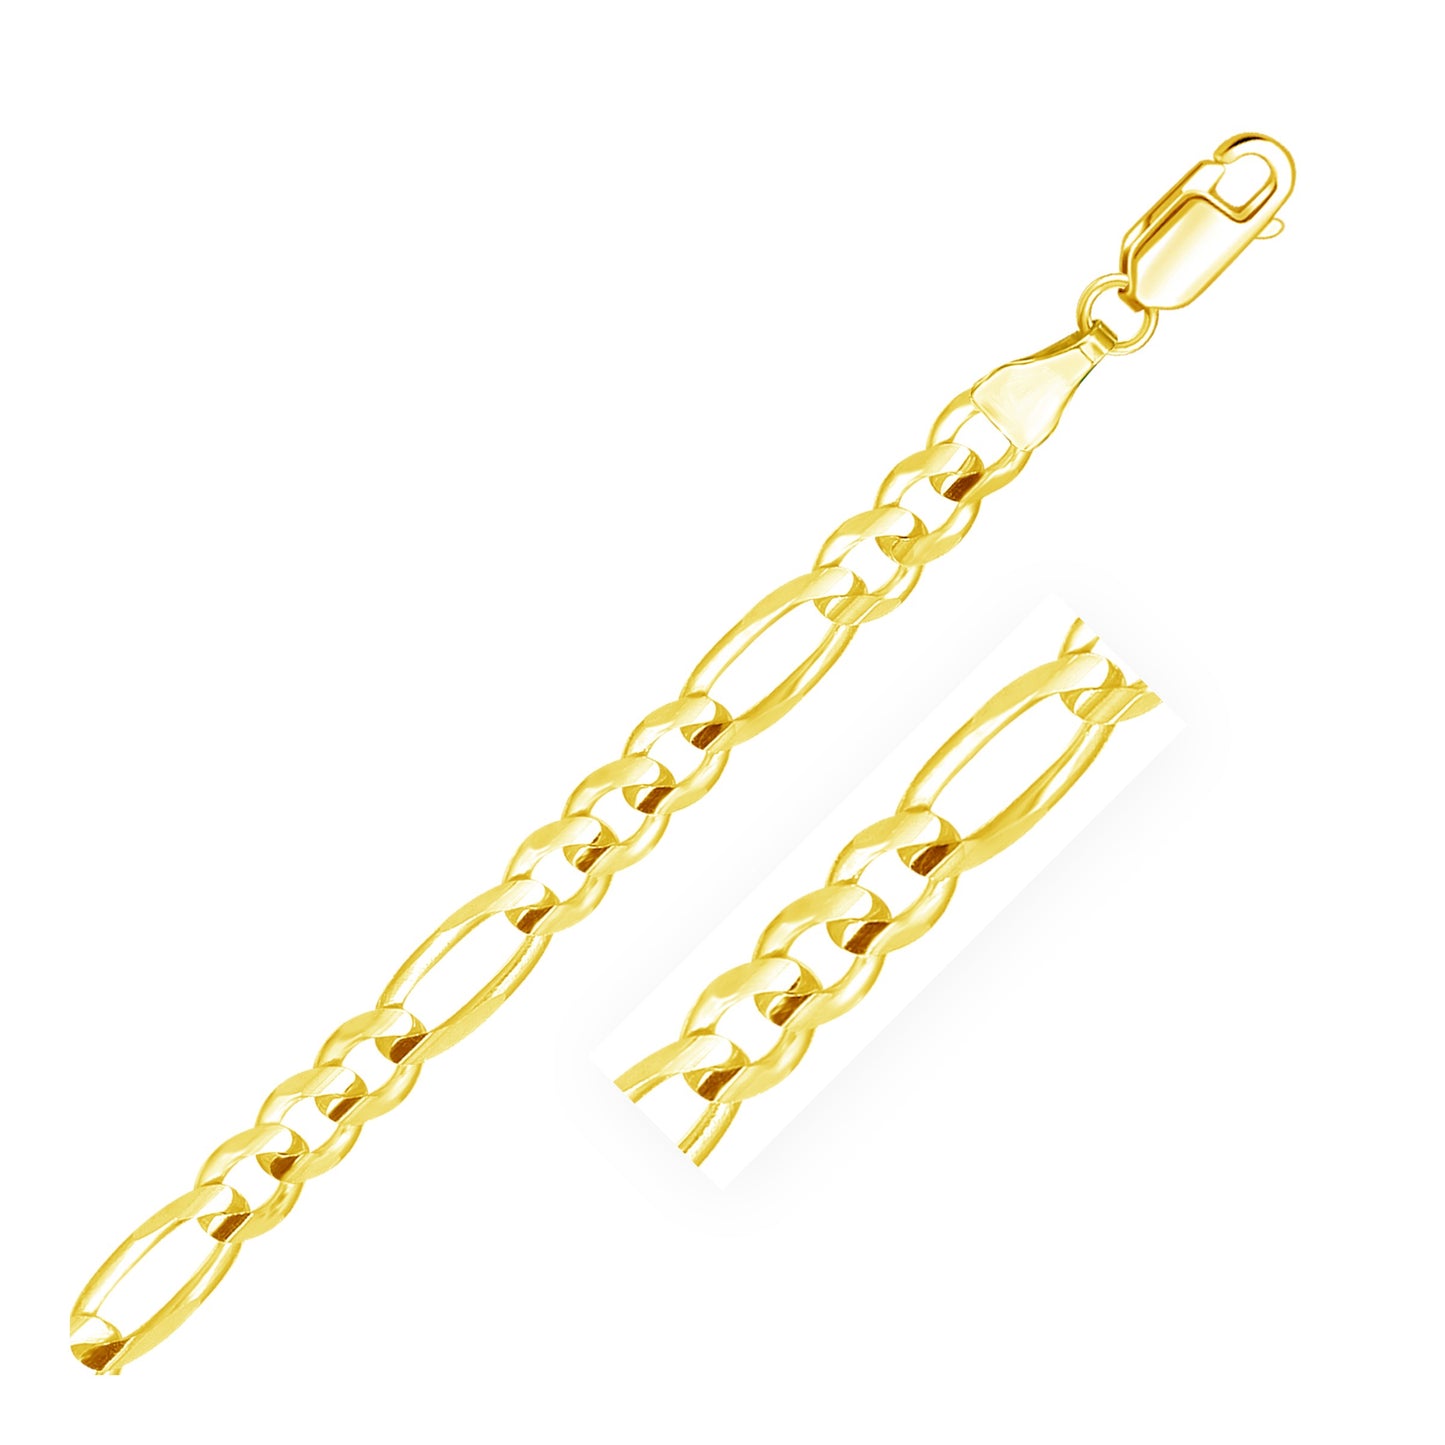 6.0mm 14k Yellow Gold Solid Figaro Chain